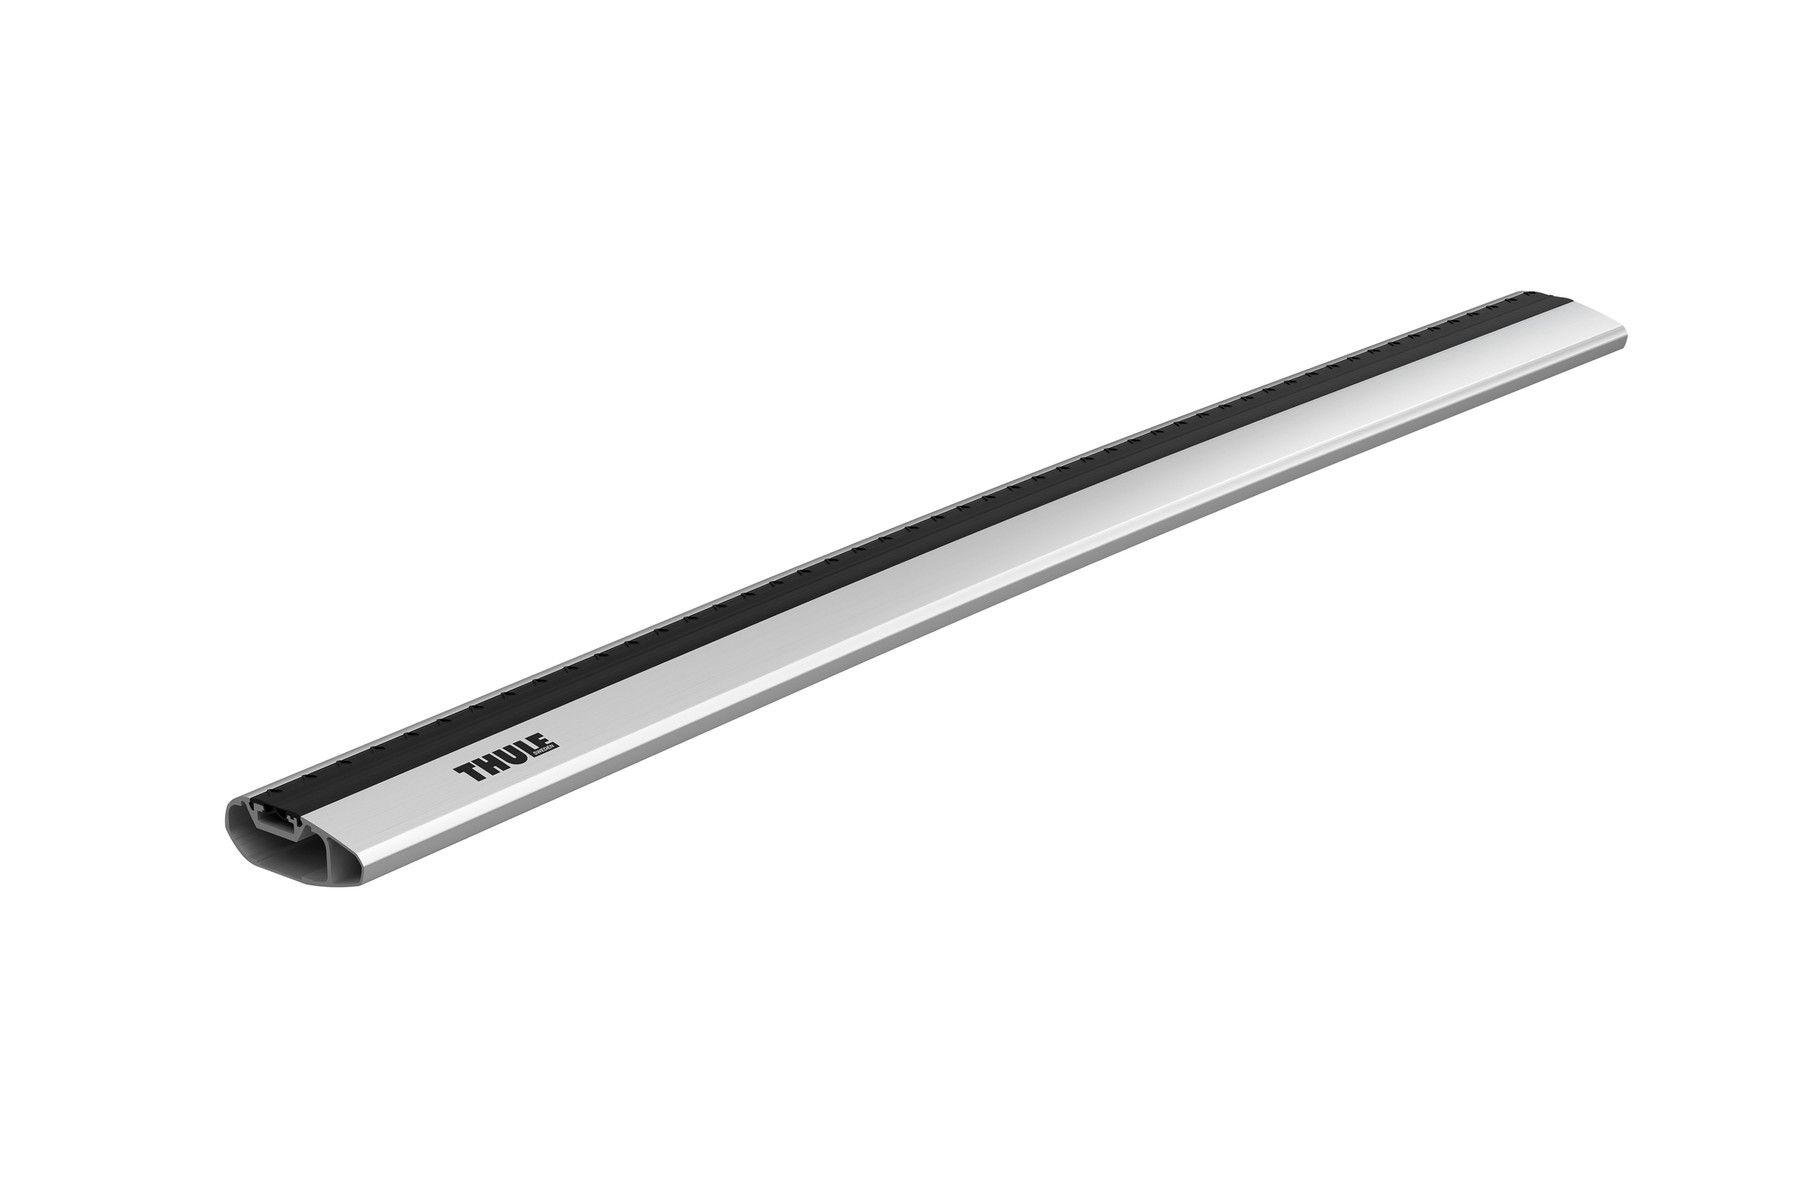 Thule WingBar Edge Silver 2 Bar Roof Rack for BMW 3 Series F31 5dr Wagon with Flush Roof Rail (2012 to 2019) - Flush Rail Mount